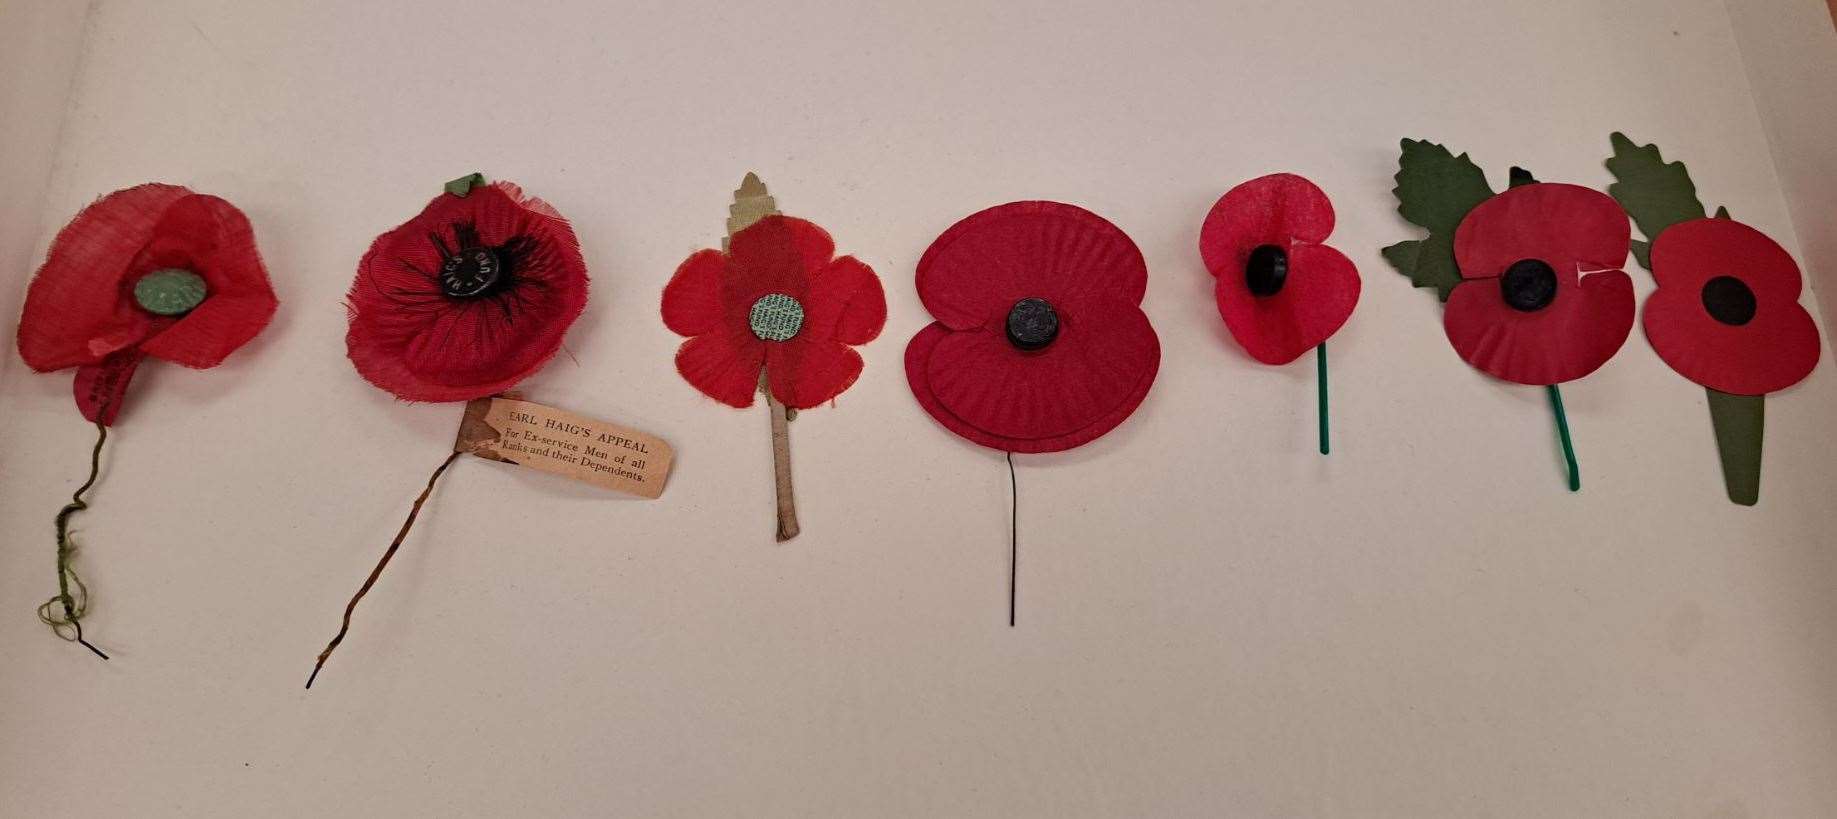 Poppy styles across the ages, from left, the very first silk poppy in 1921, to right, today's plastic-free poppy